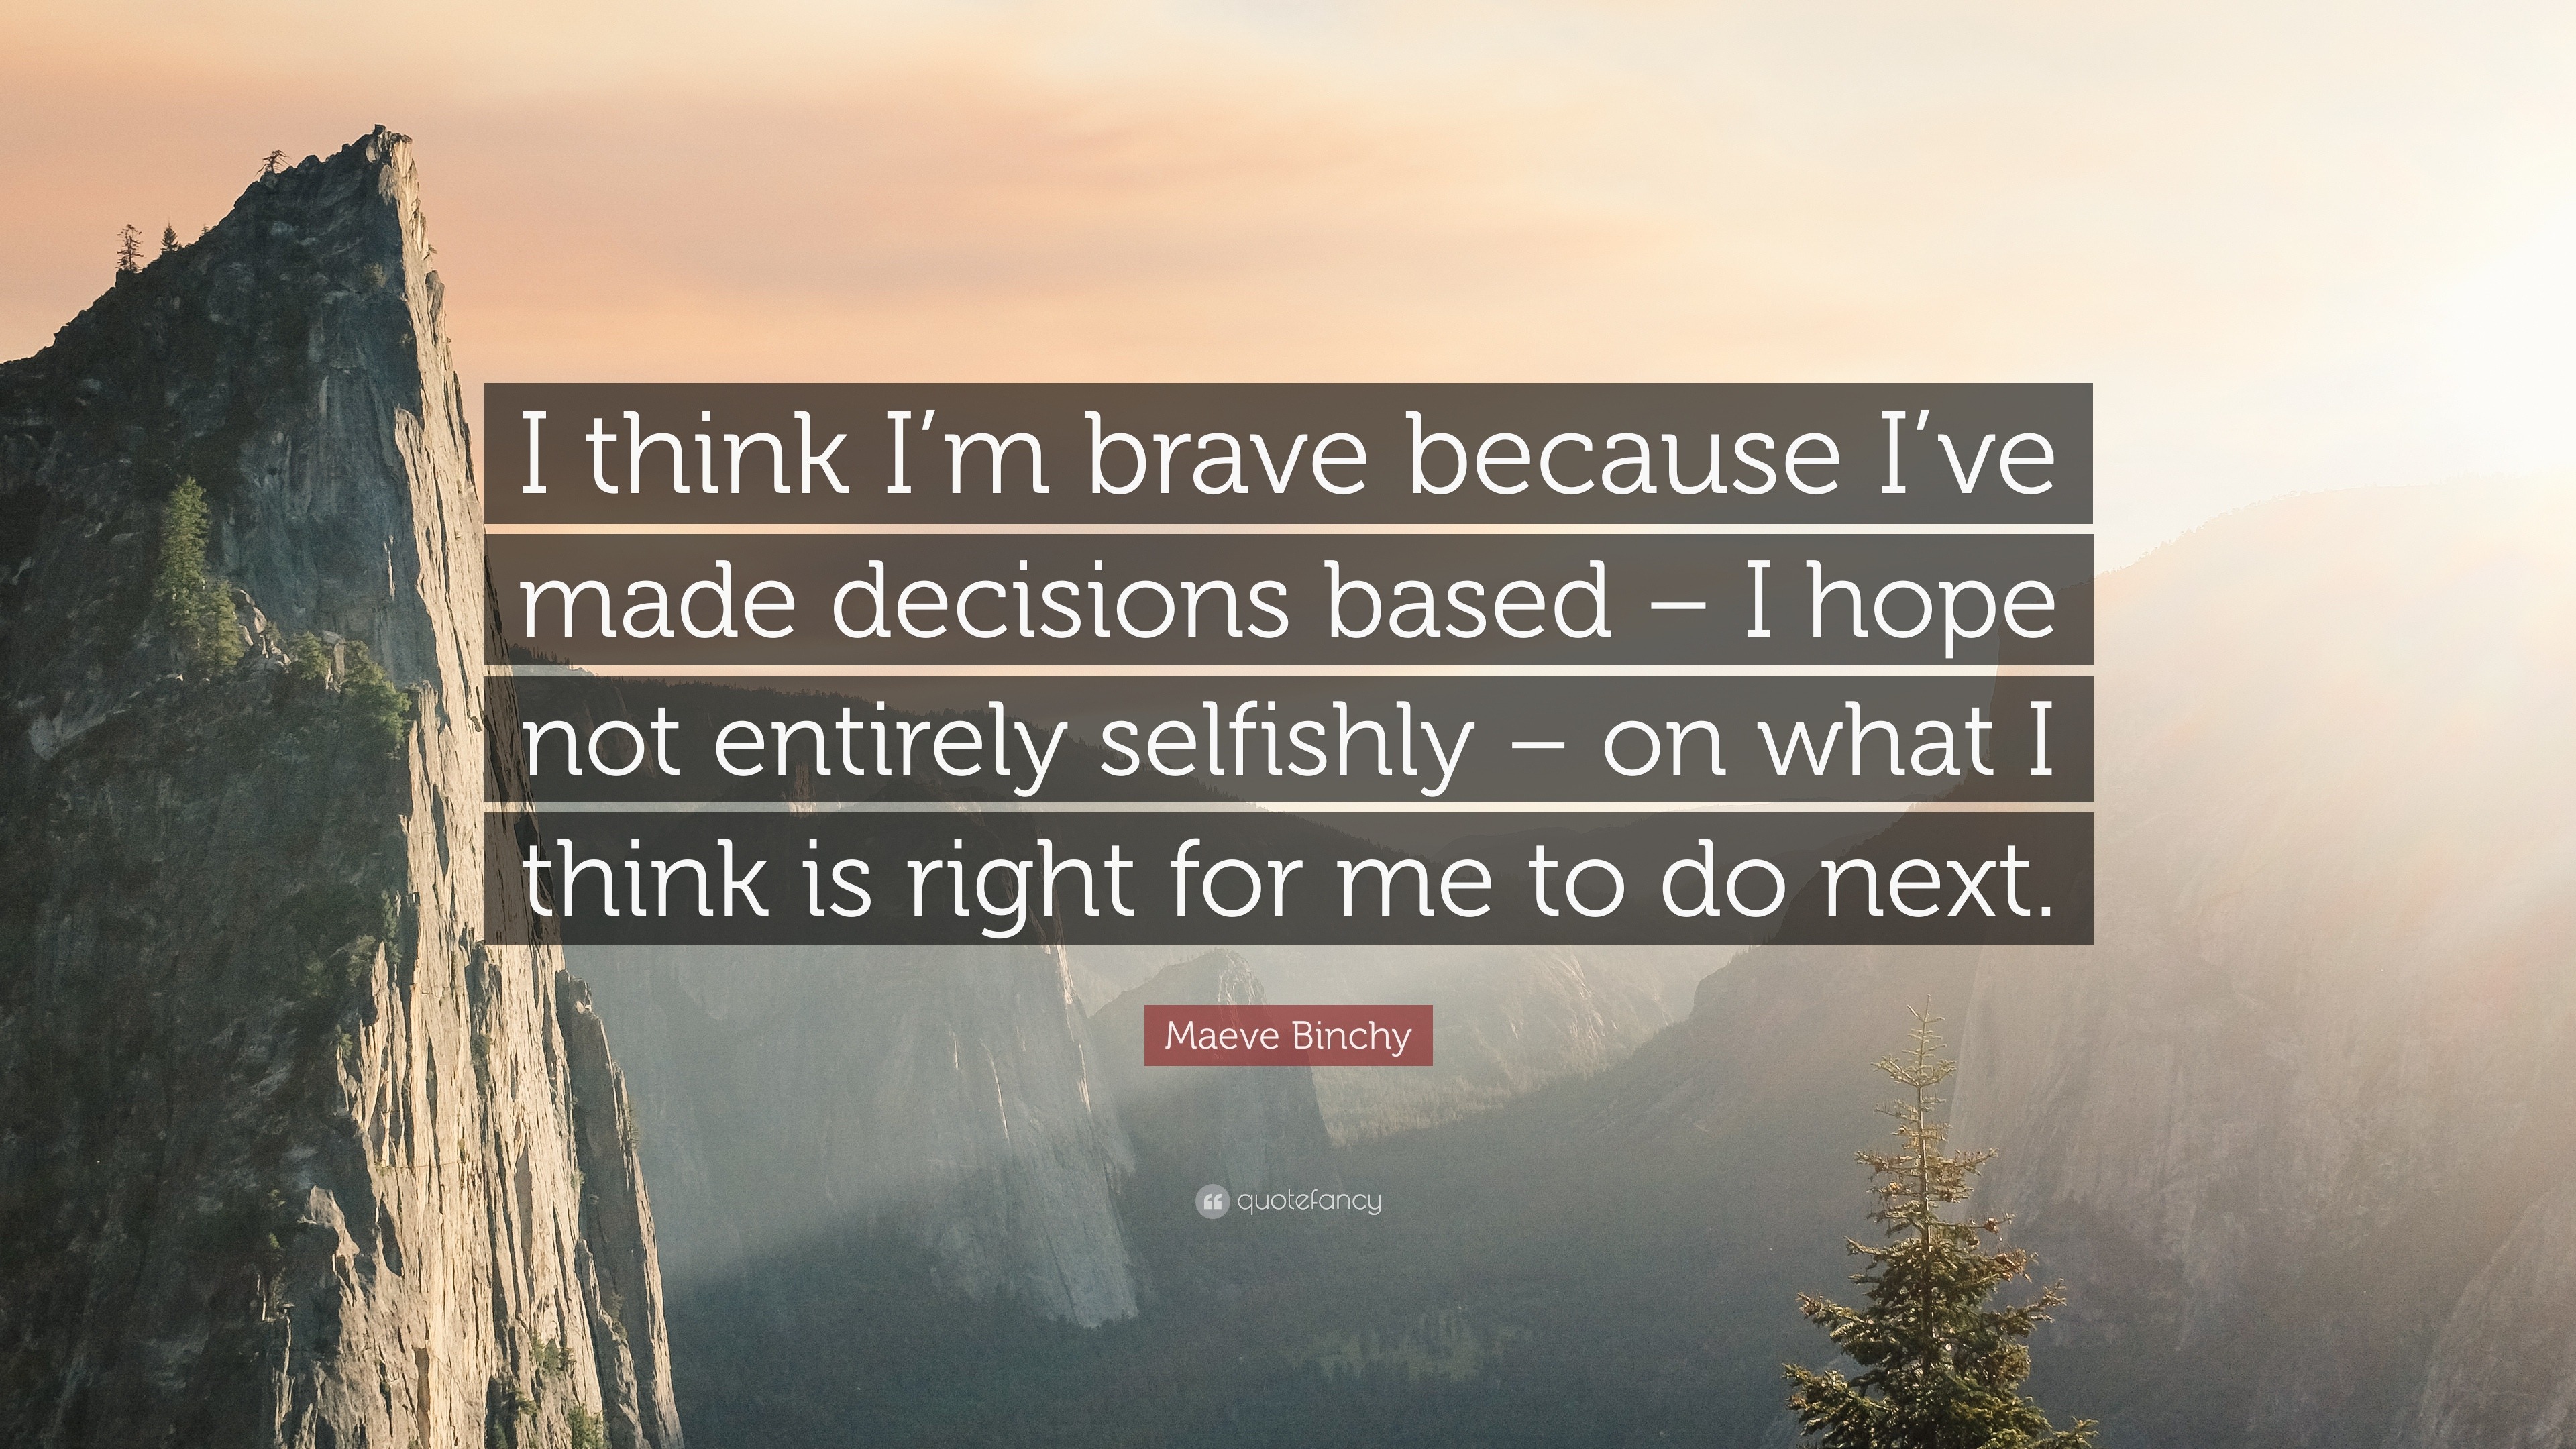 Maeve Binchy Quote: “I think I'm brave because I've made decisions based –  I hope not entirely selfishly – on what I think is right for me to”